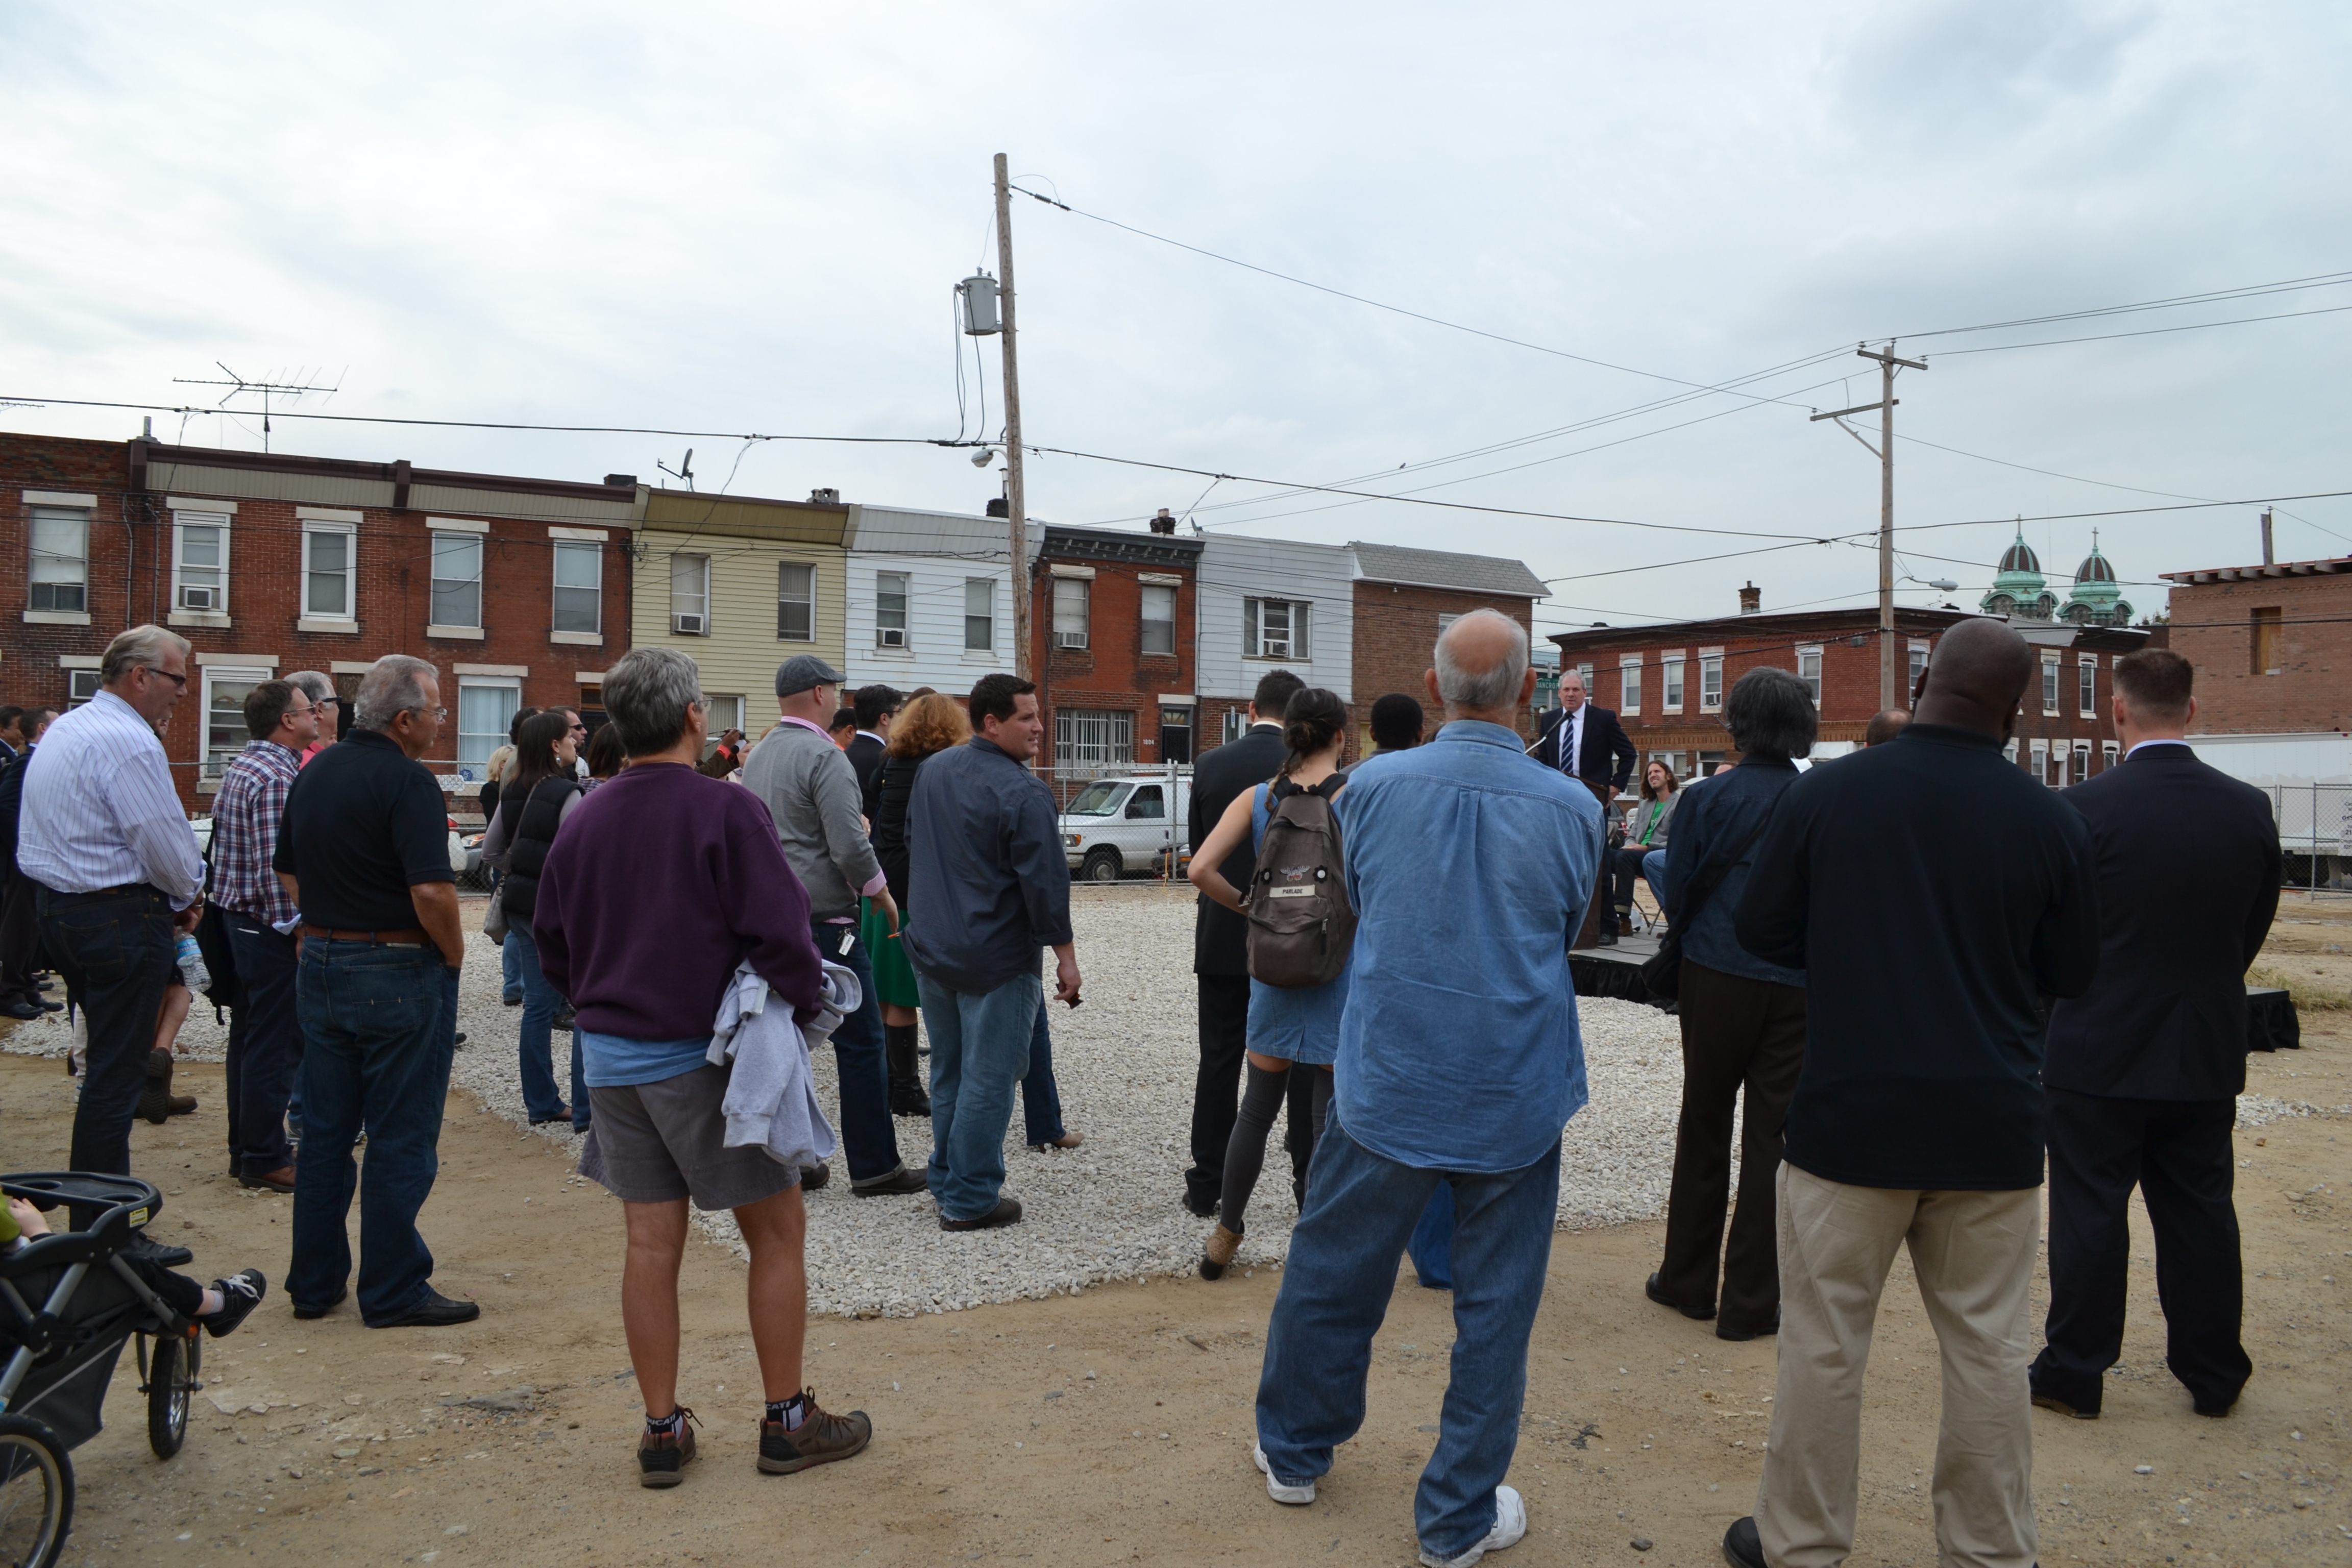 The event was an opportunity for neighbors to learn more about the project scope